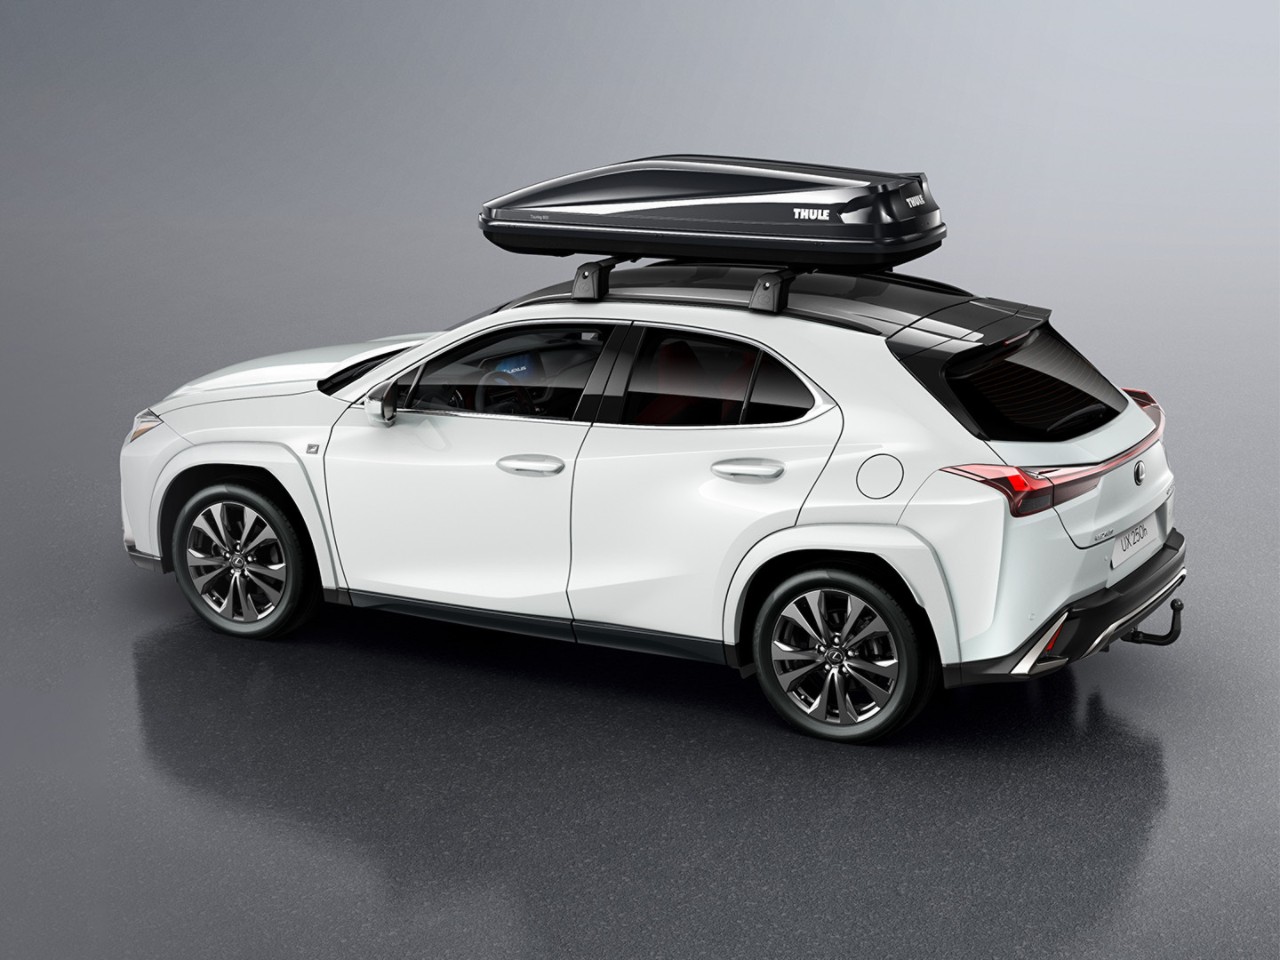 A graphic of a Lexus with a roof box